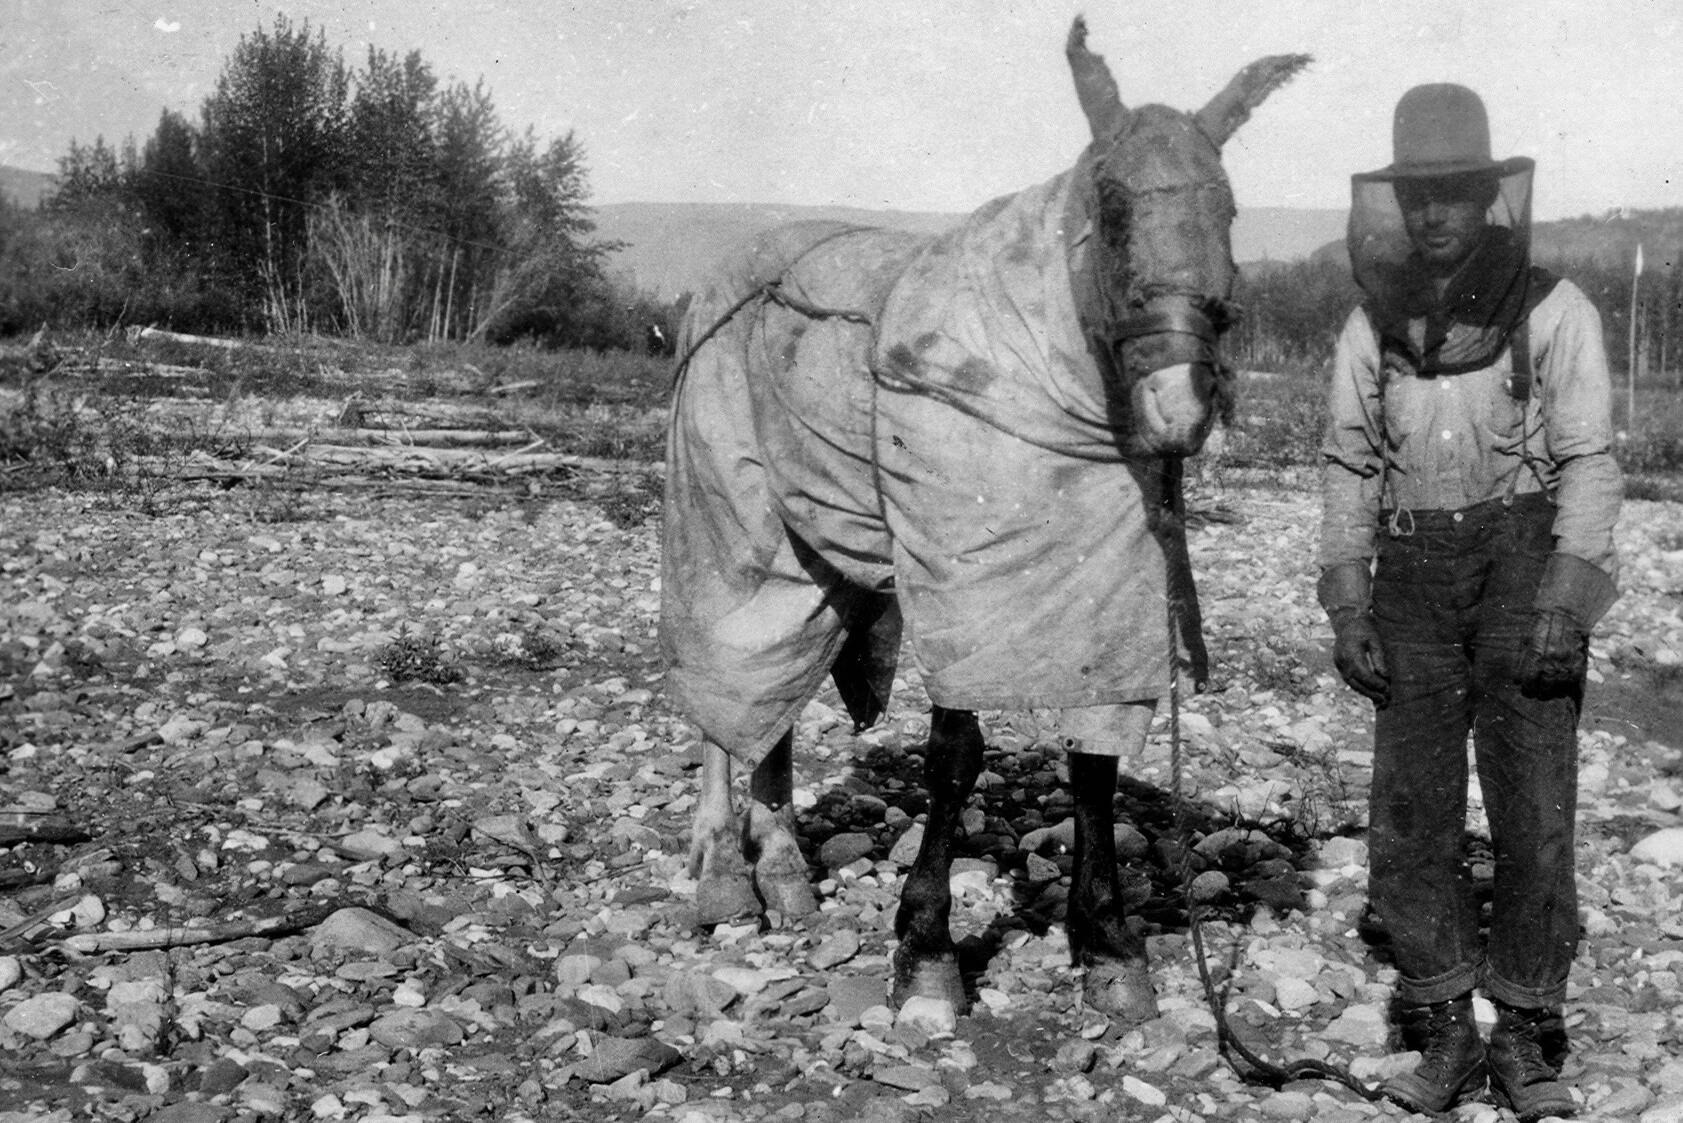 R.L. Phillips pauses with his “mosquito-proofed” horse Sparkplug on a gravel bar of the Tatonduk River, a tributary of the Yukon River, on June 17, 1930. (From the J.B. Mertie Collection of photos, U.S. Geological Survey Denver Library Photographic Collection, public domain)